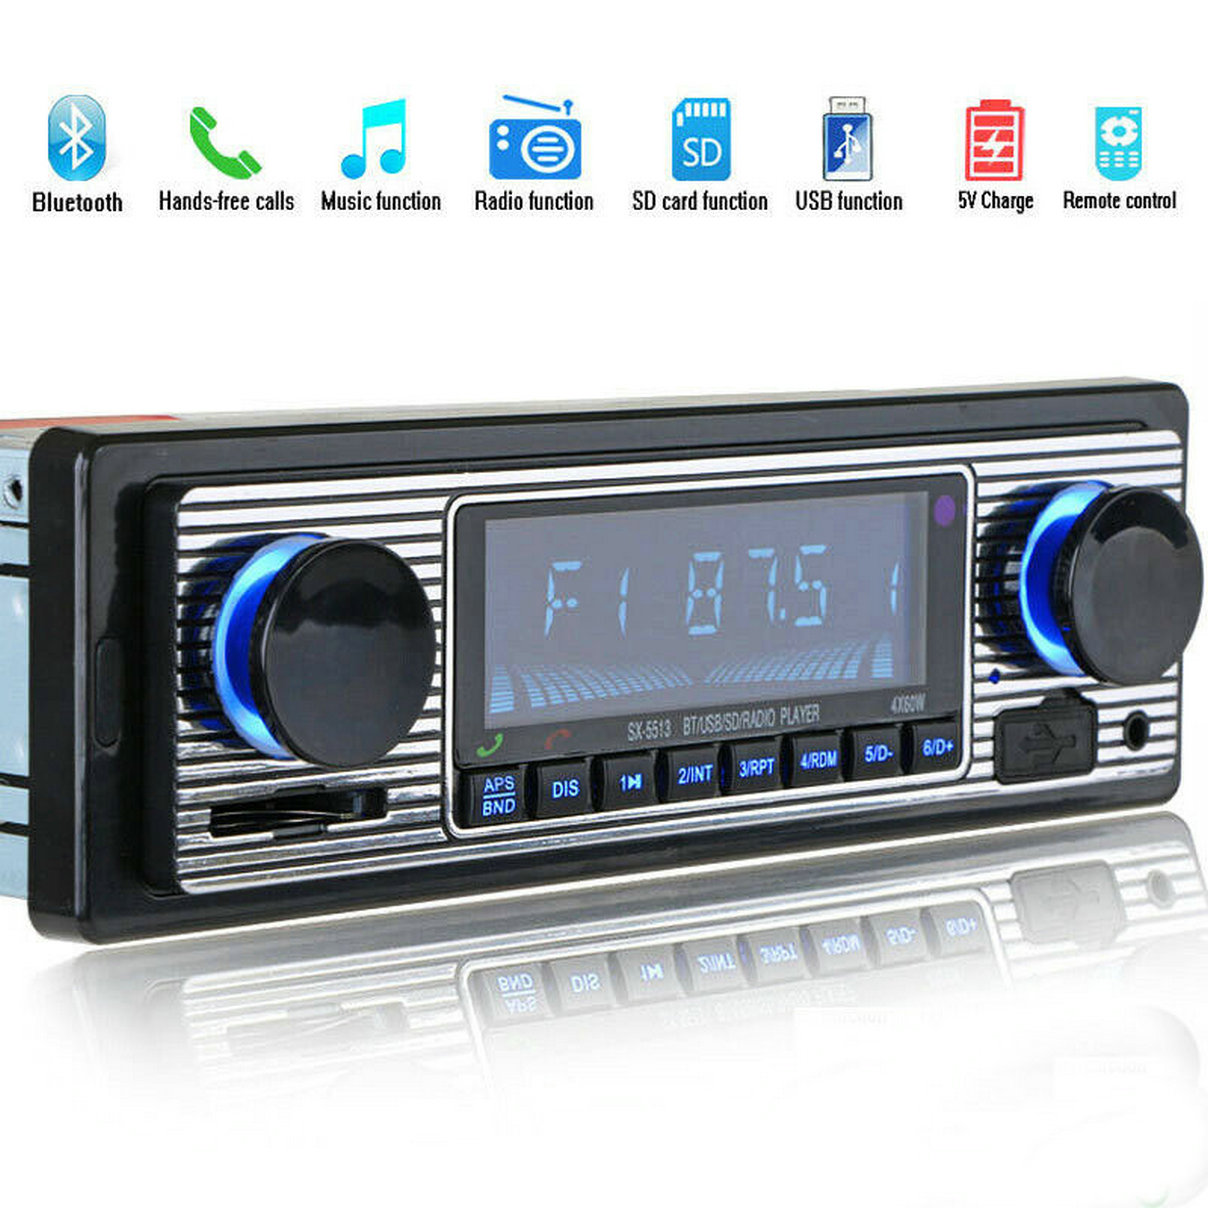 Classic Bluetooth Car Stereo, FM Radio Receiver, Hands-Free Calling,  Built-in Microphone, USB/SD/AUX Port, Support MP3/WMA/WAV, Dual Knob Audio  Car